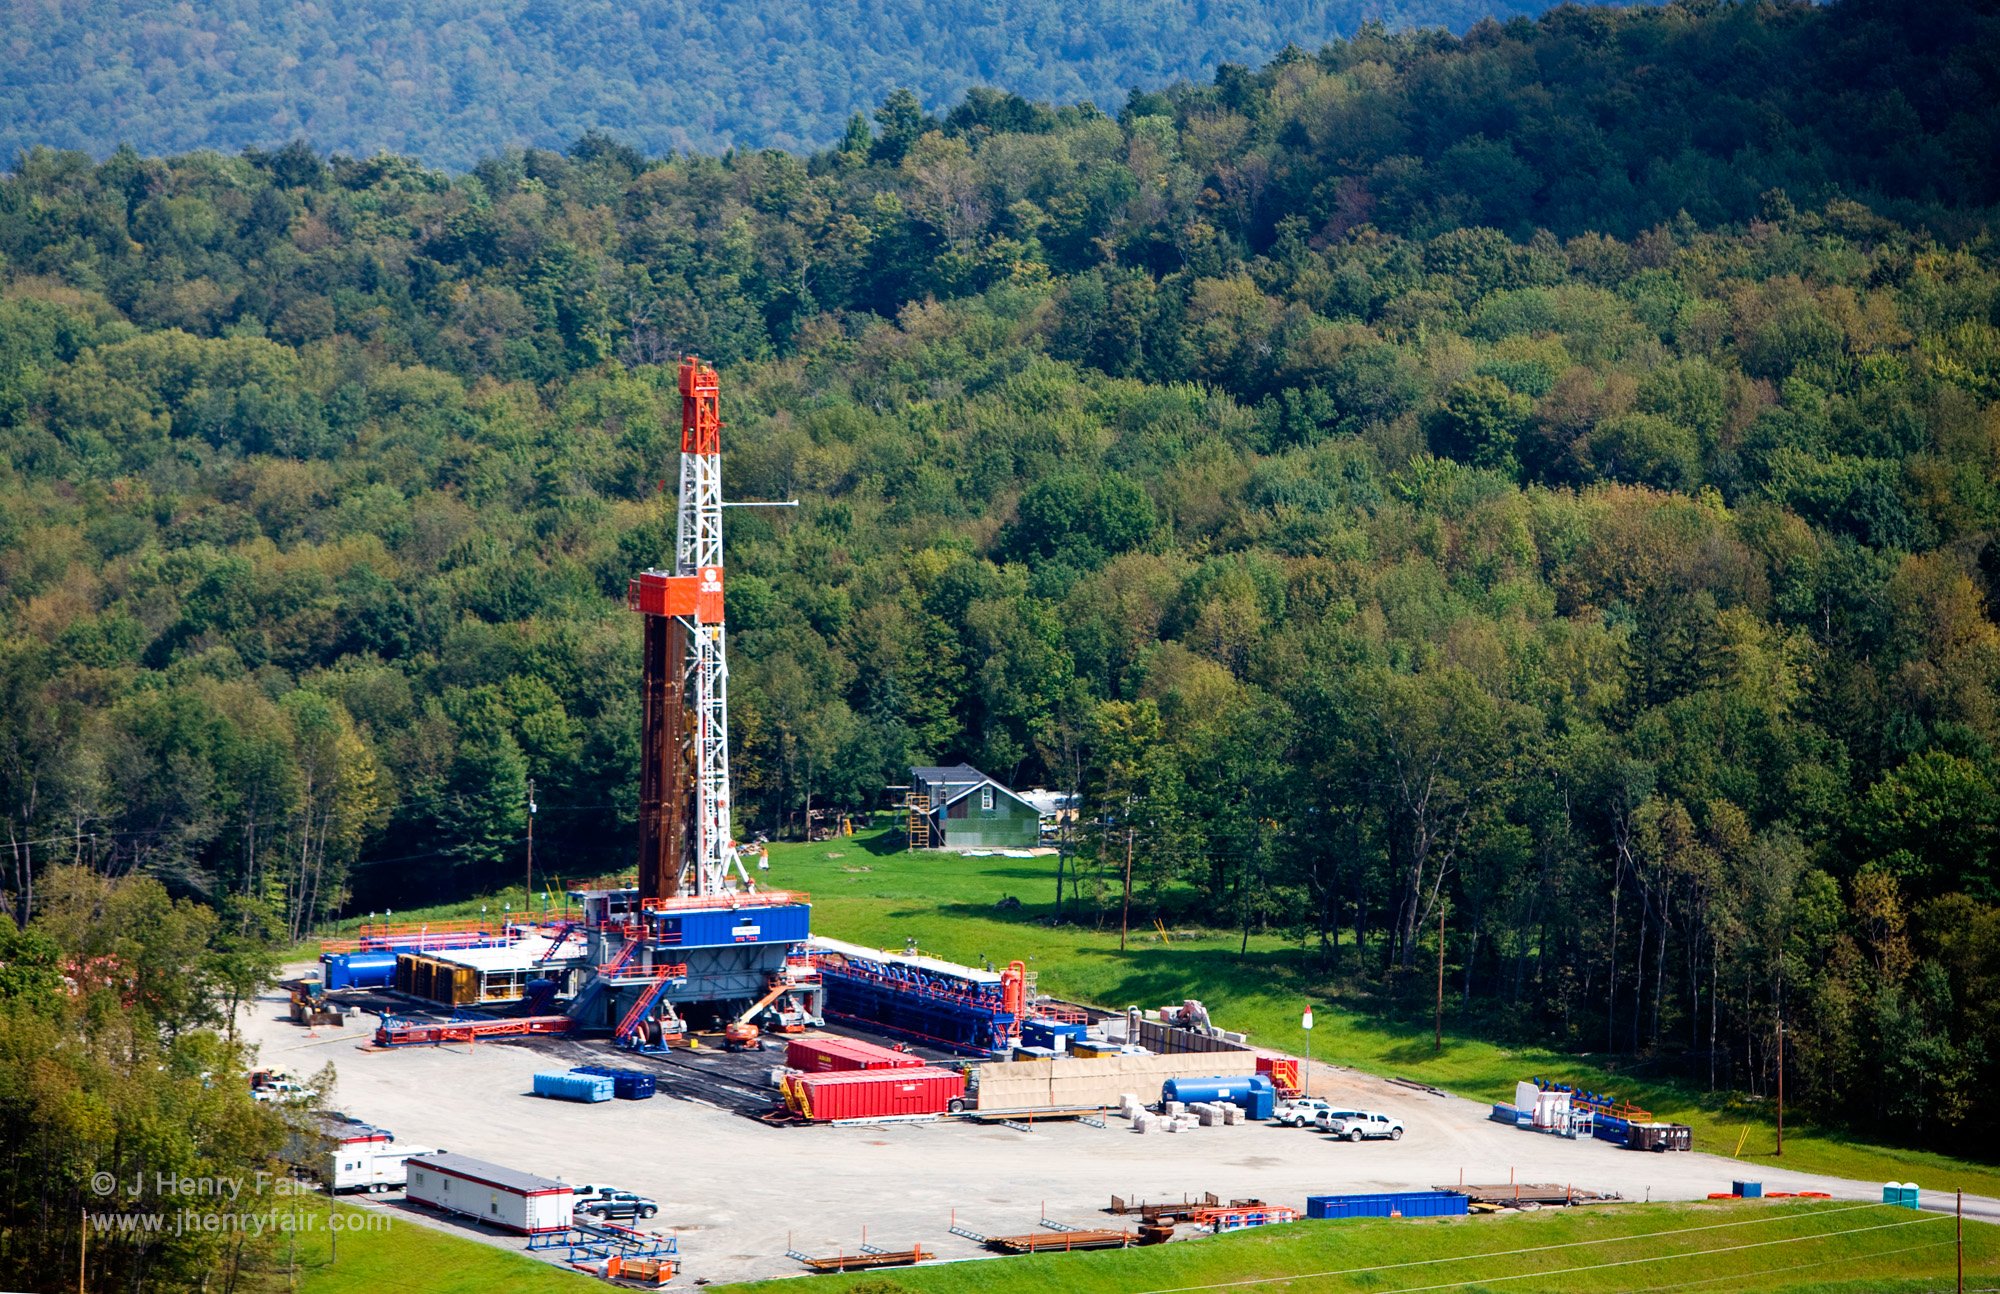  Landowners often are unaware of the scale of operations of a gas well when they sign the leases.  Aside from the visual impact to the property, with remnant drill pads and possible water contamination, the longer term concern of damage to property v